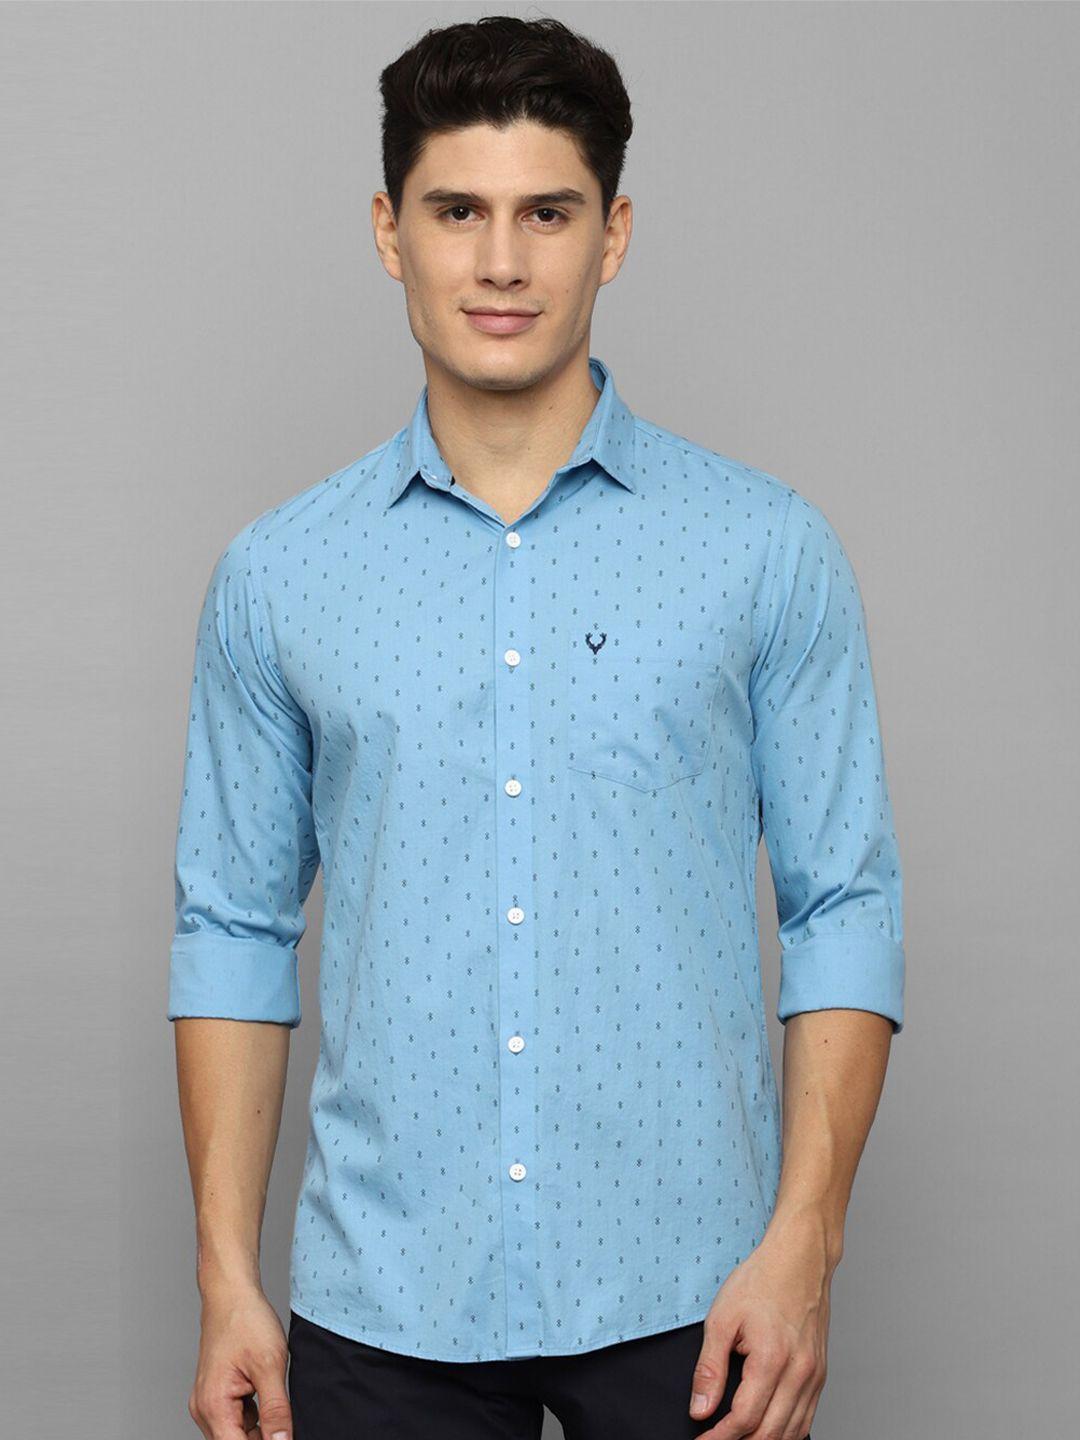 allen-solly-men-slim-fit-micro-ditsy-printed-casual-pure-cotton-shirt